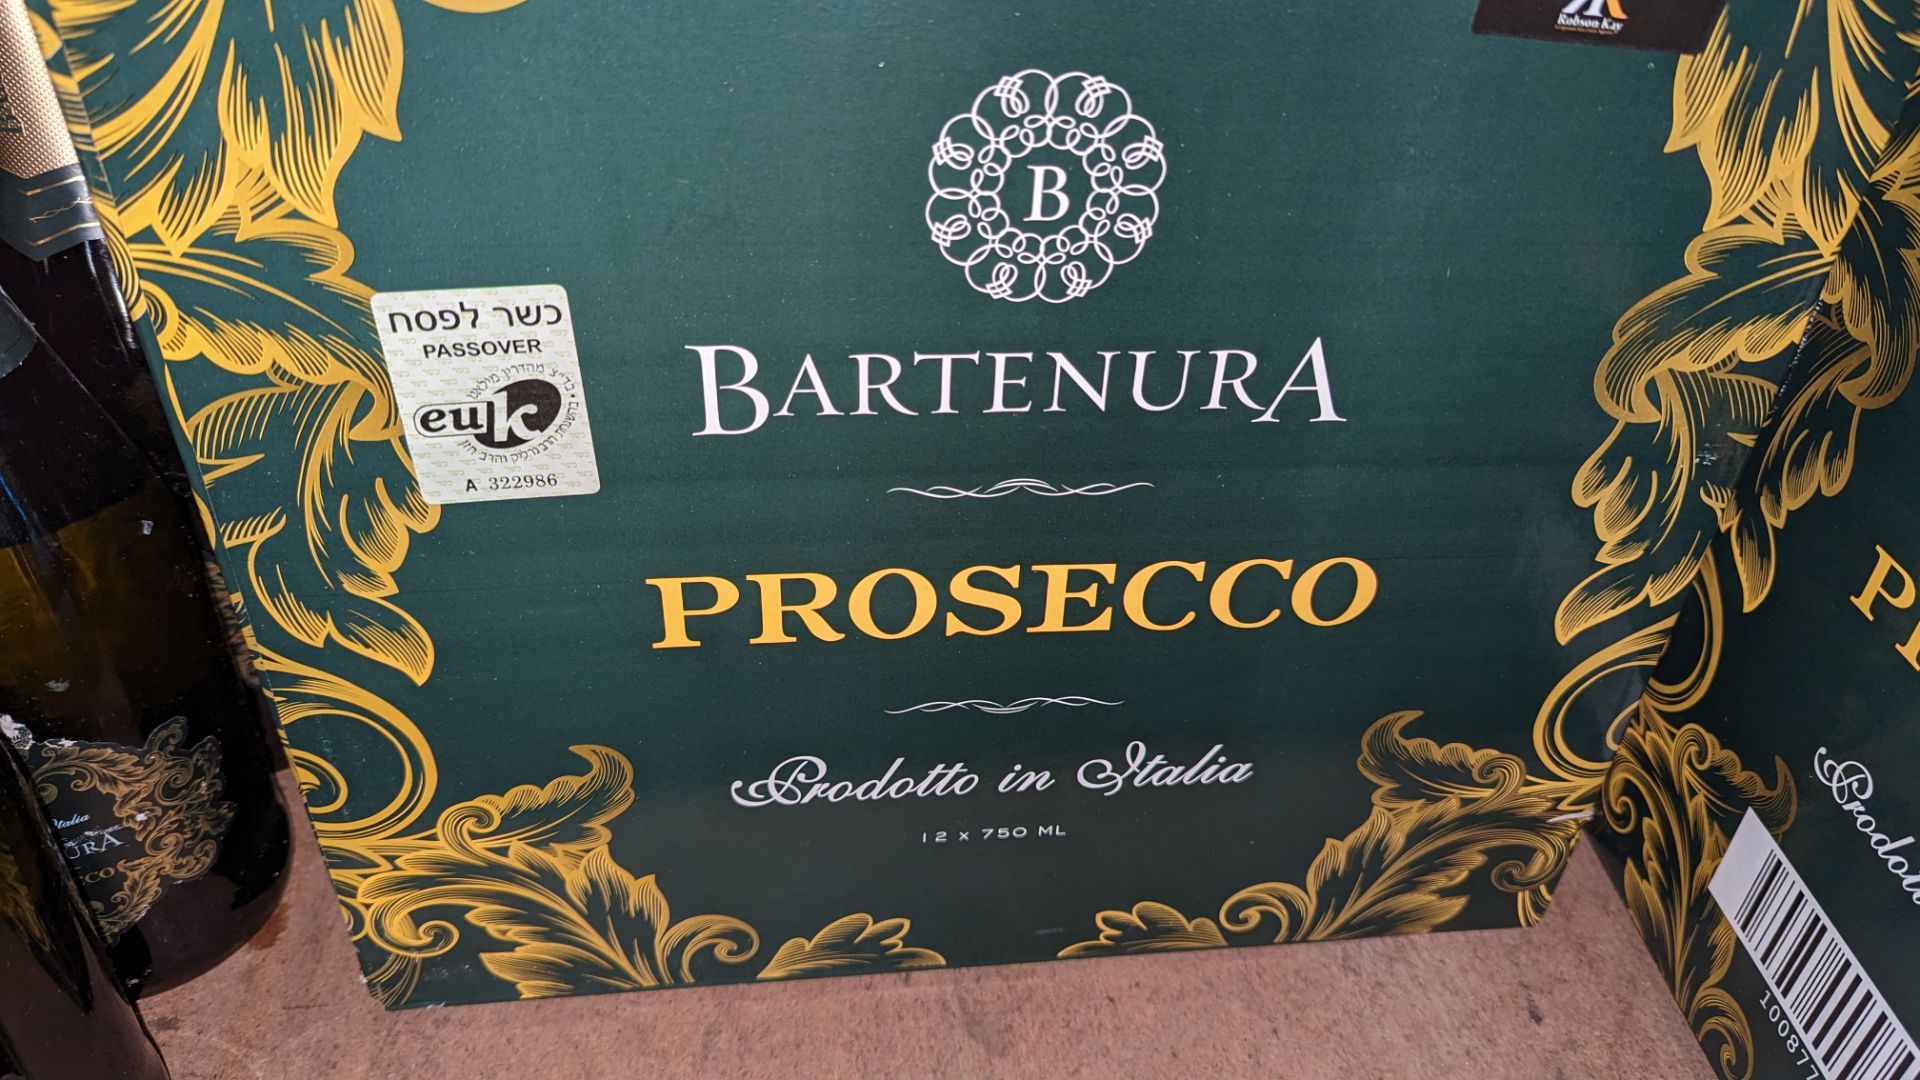 12 bottles of Bartenura Brut Prosecco Italian white sparkling wine sold under AWRS number XQAW000001 - Image 3 of 3